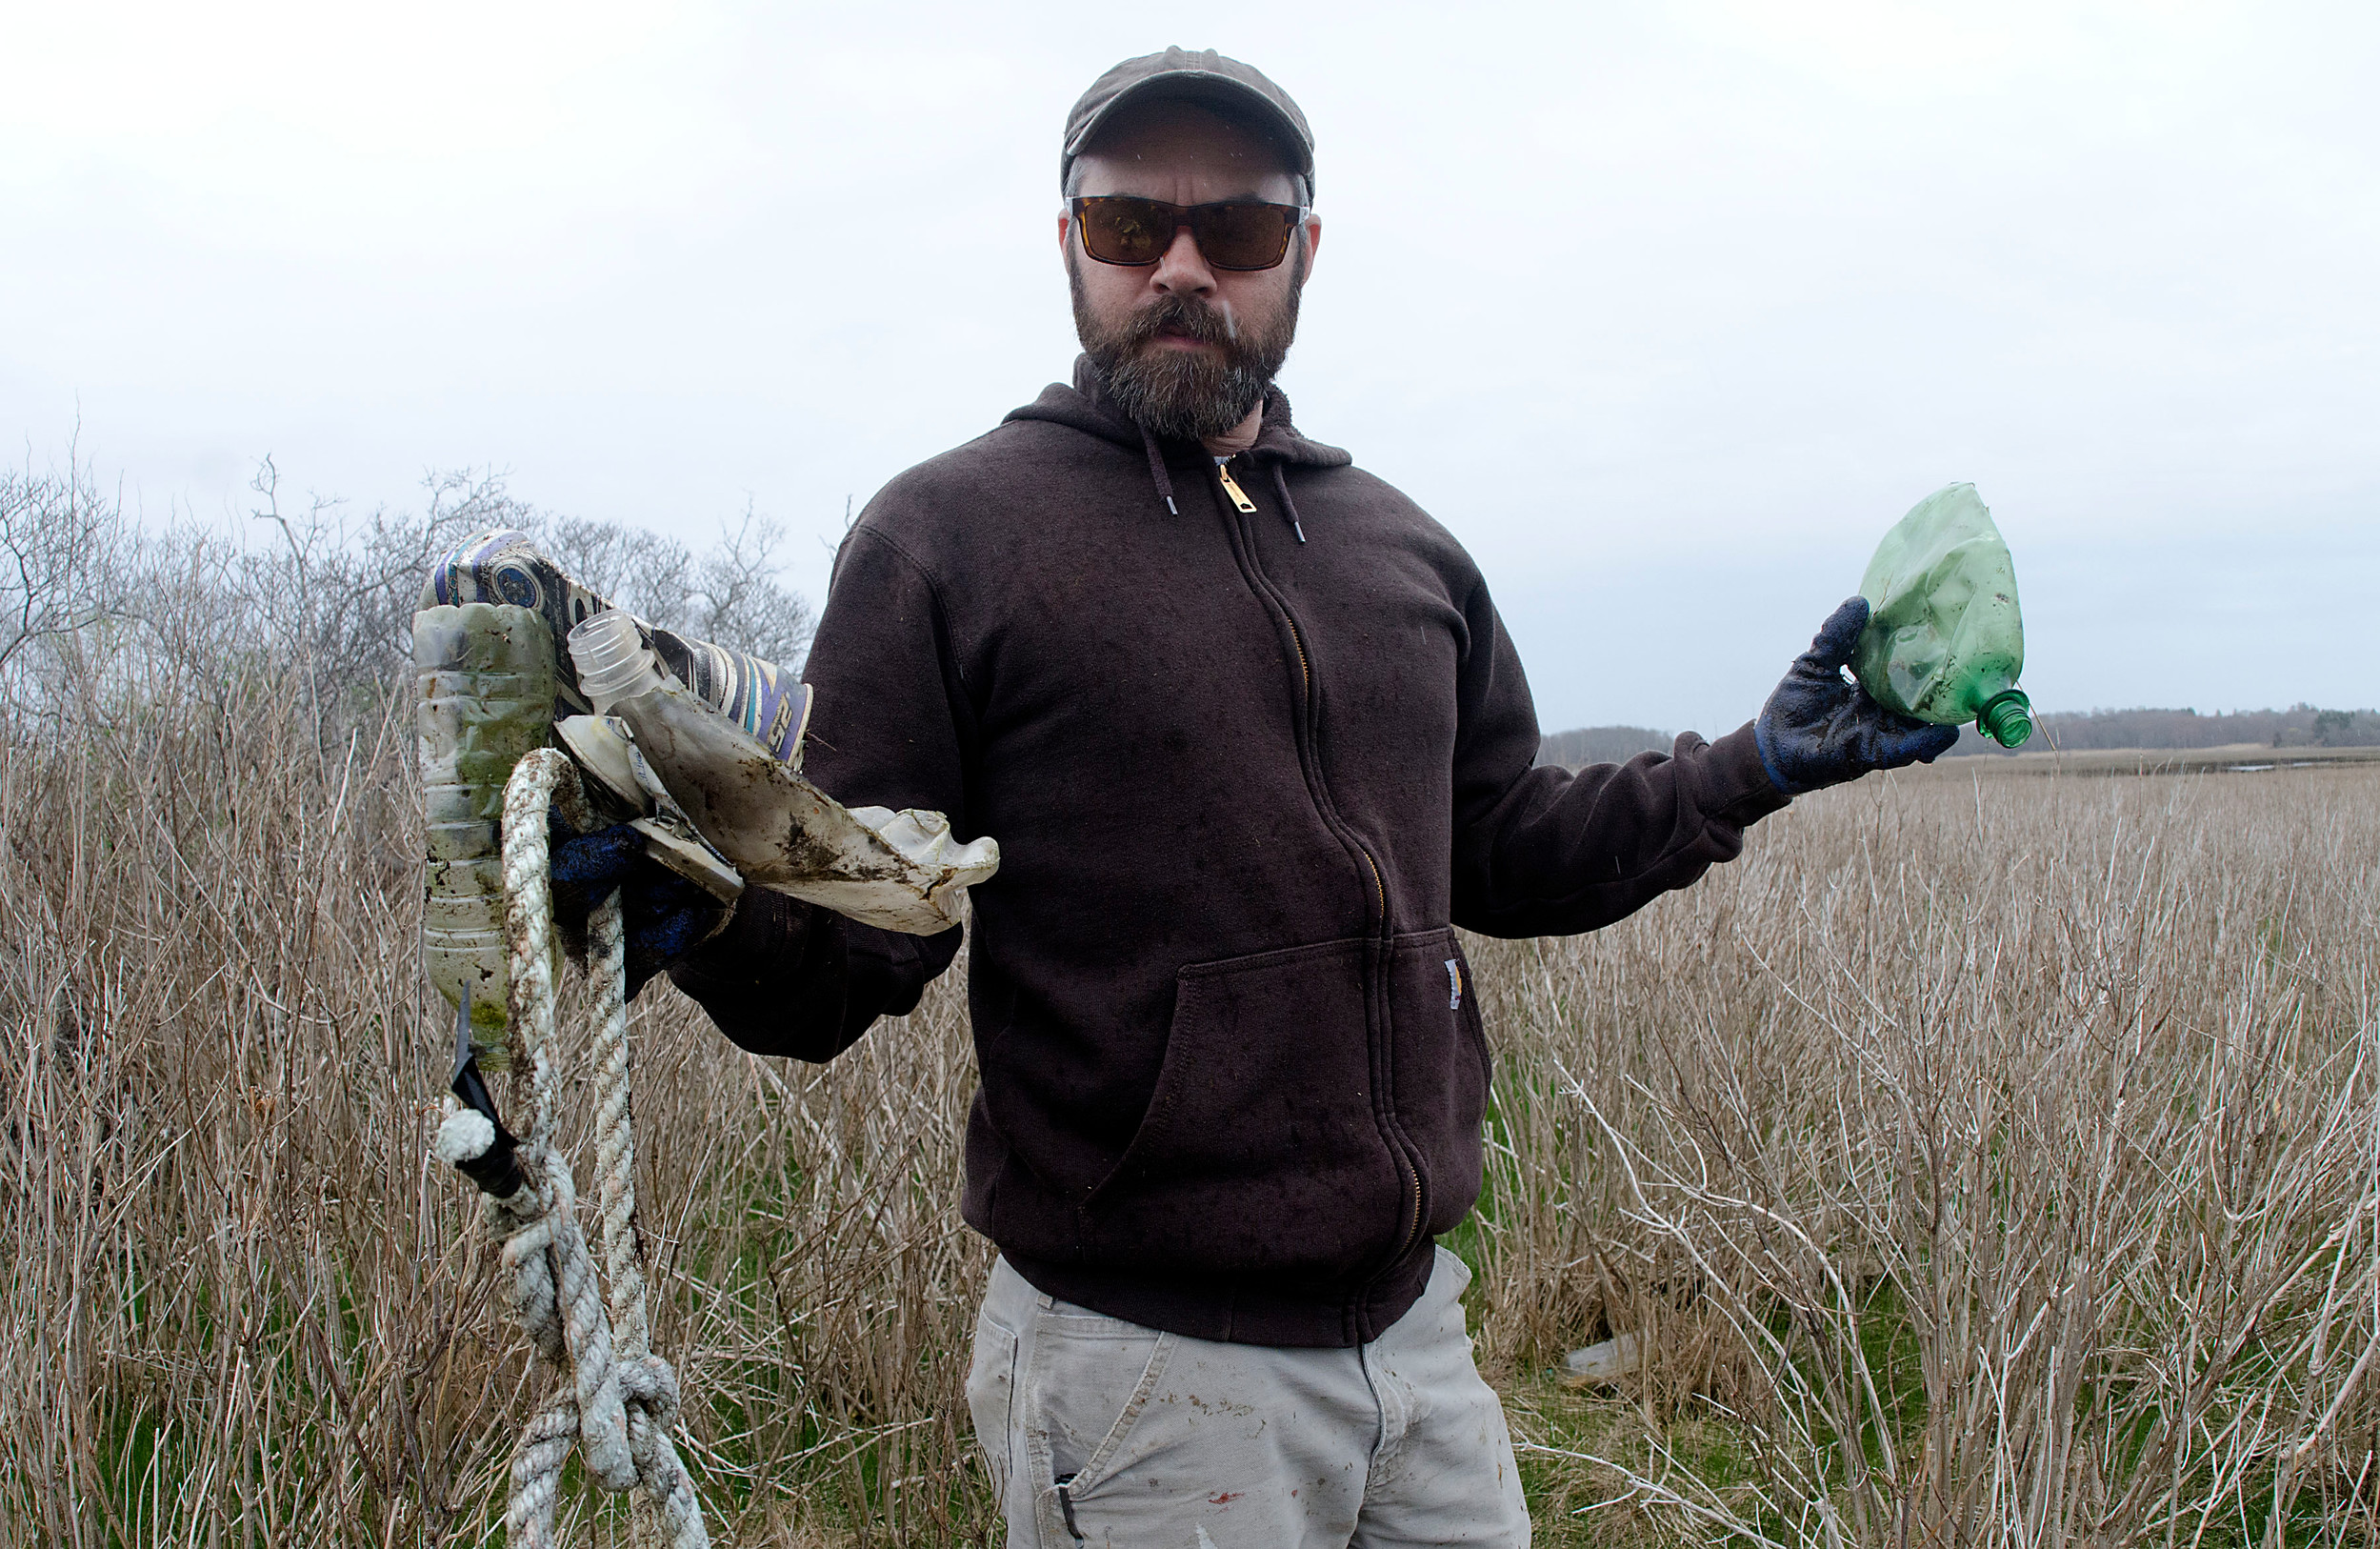 Tanner Steeves of DEM holds up trash that he found during the restoration.